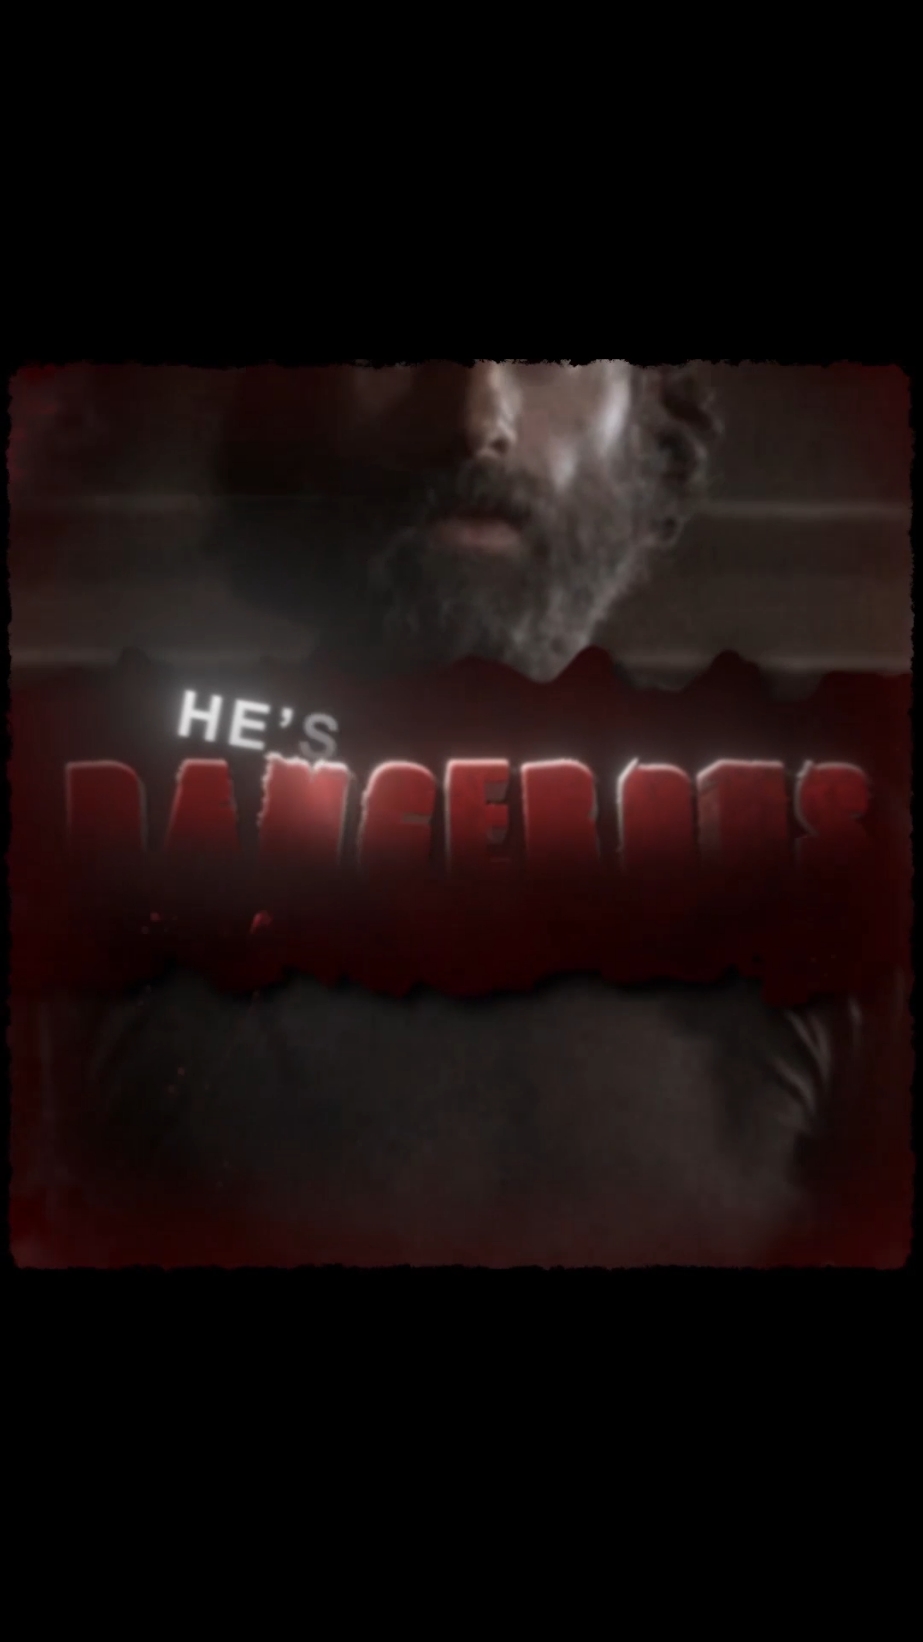 Rick is DANGEROUS | ❗PJF in bio ❗| (everything):belongs to me (except the bloody text) | tags:#fypage #rickgrimes #rickgrimesedit #edit #twd #thewalkingdead [FAKE ALL]